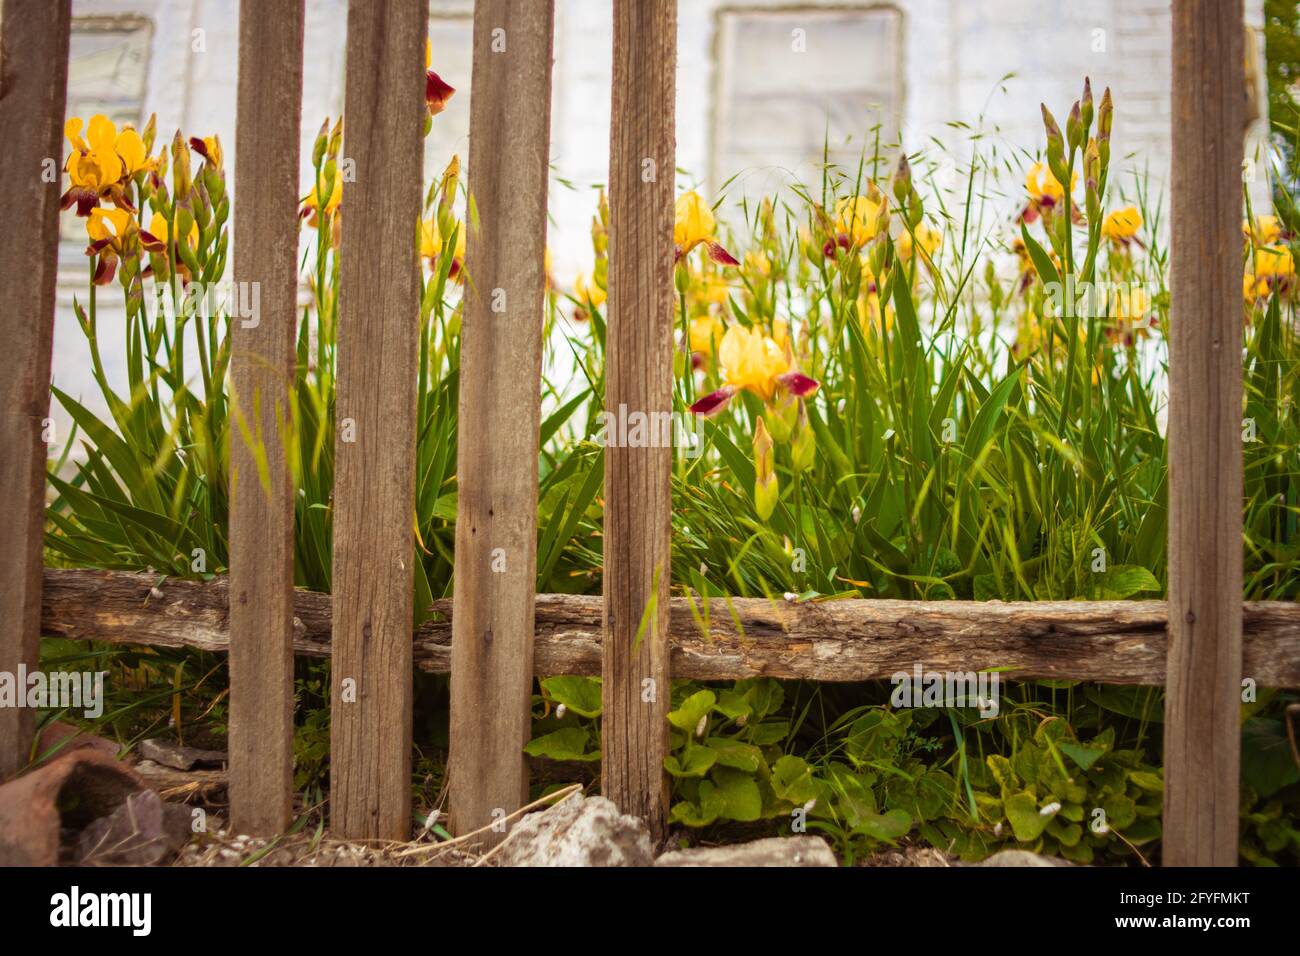 Old broken picket fence. Yellow iris flowers and white rural house in blurred background. Stock Photo